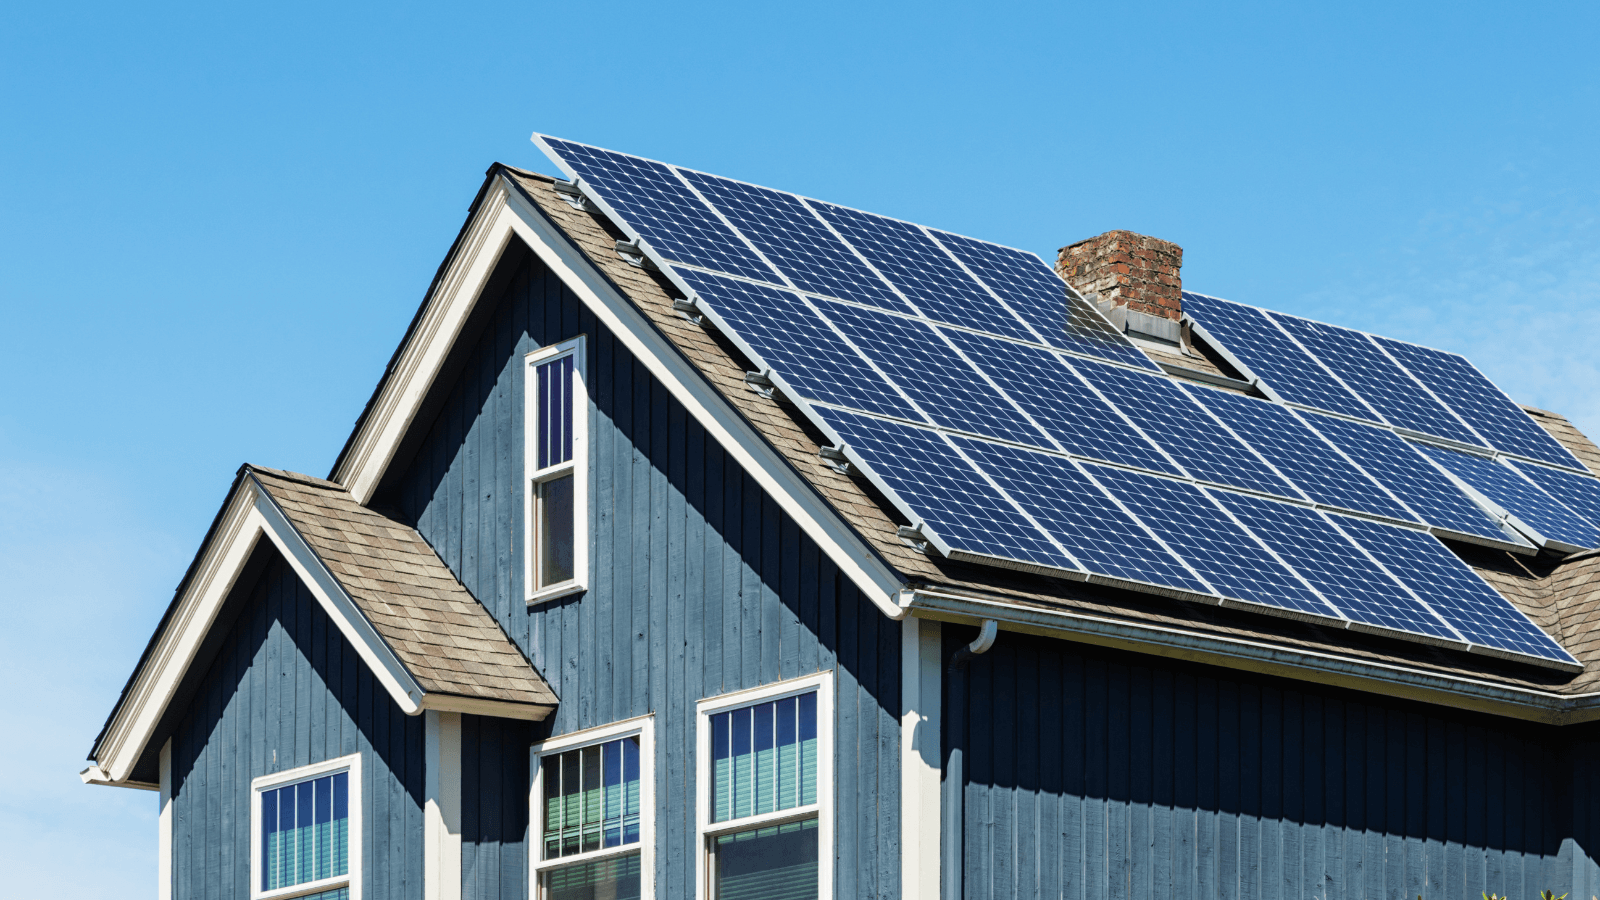 a blue house with solar panels on the slanted roof against a clear blue sky 